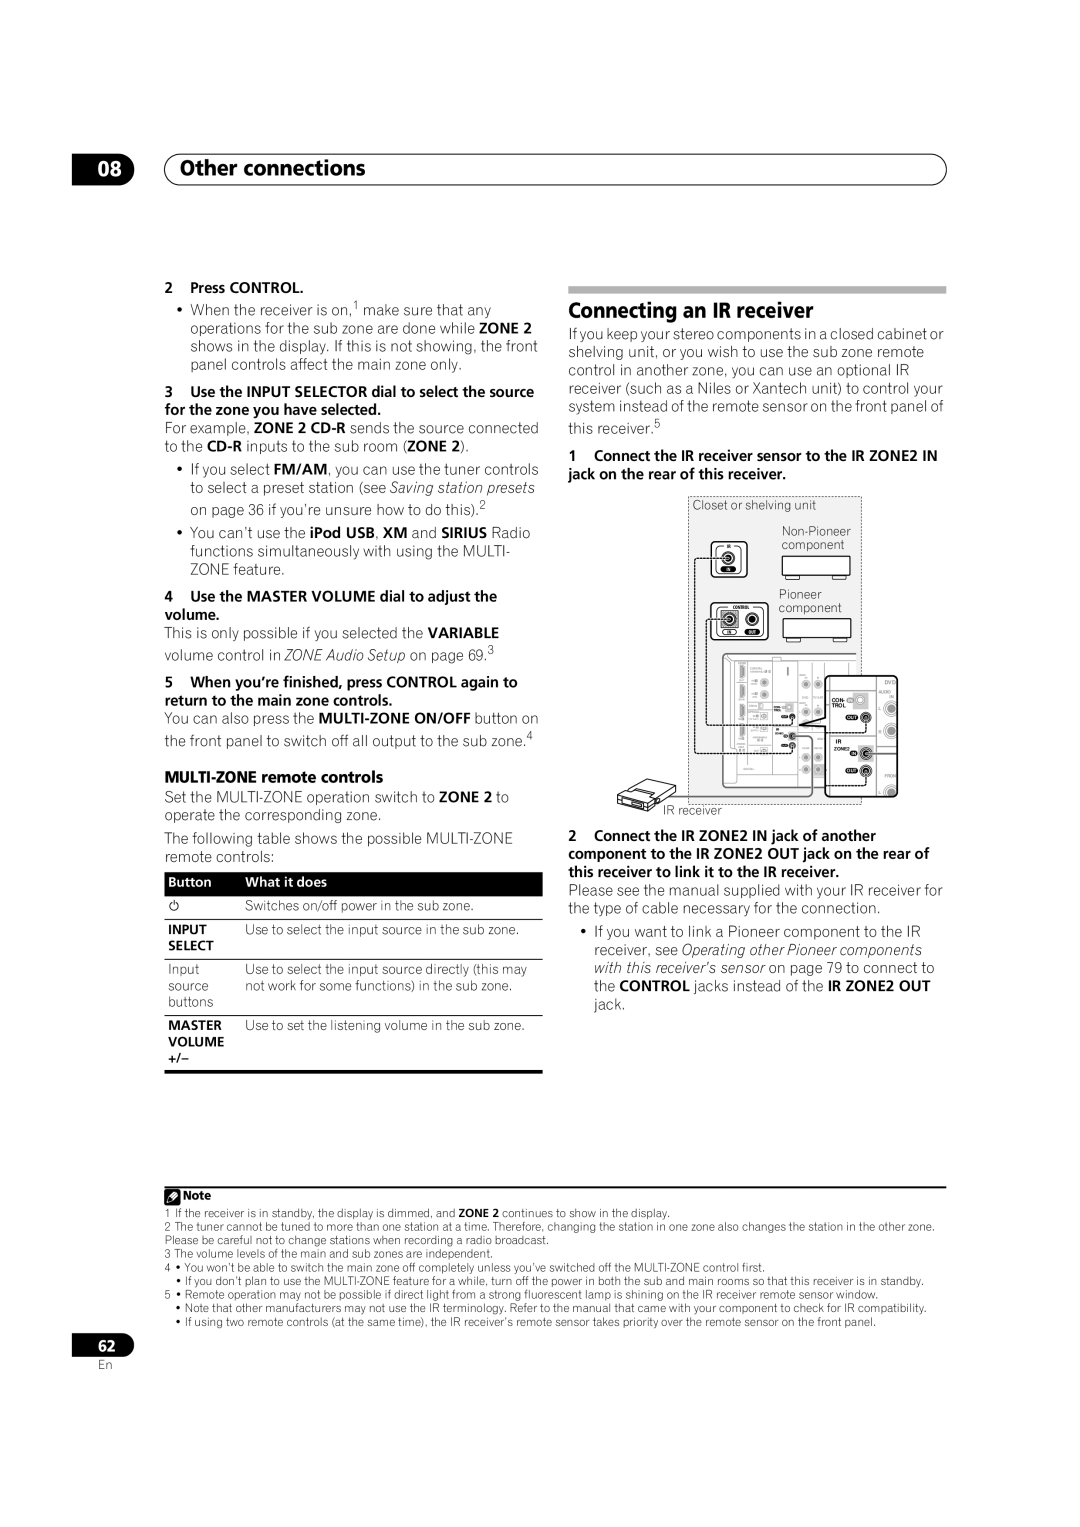 Pioneer VSX-1018AH-K 7 operating instructions Connecting an IR receiver, MULTI-ZONEremote controls, 08Other connections 